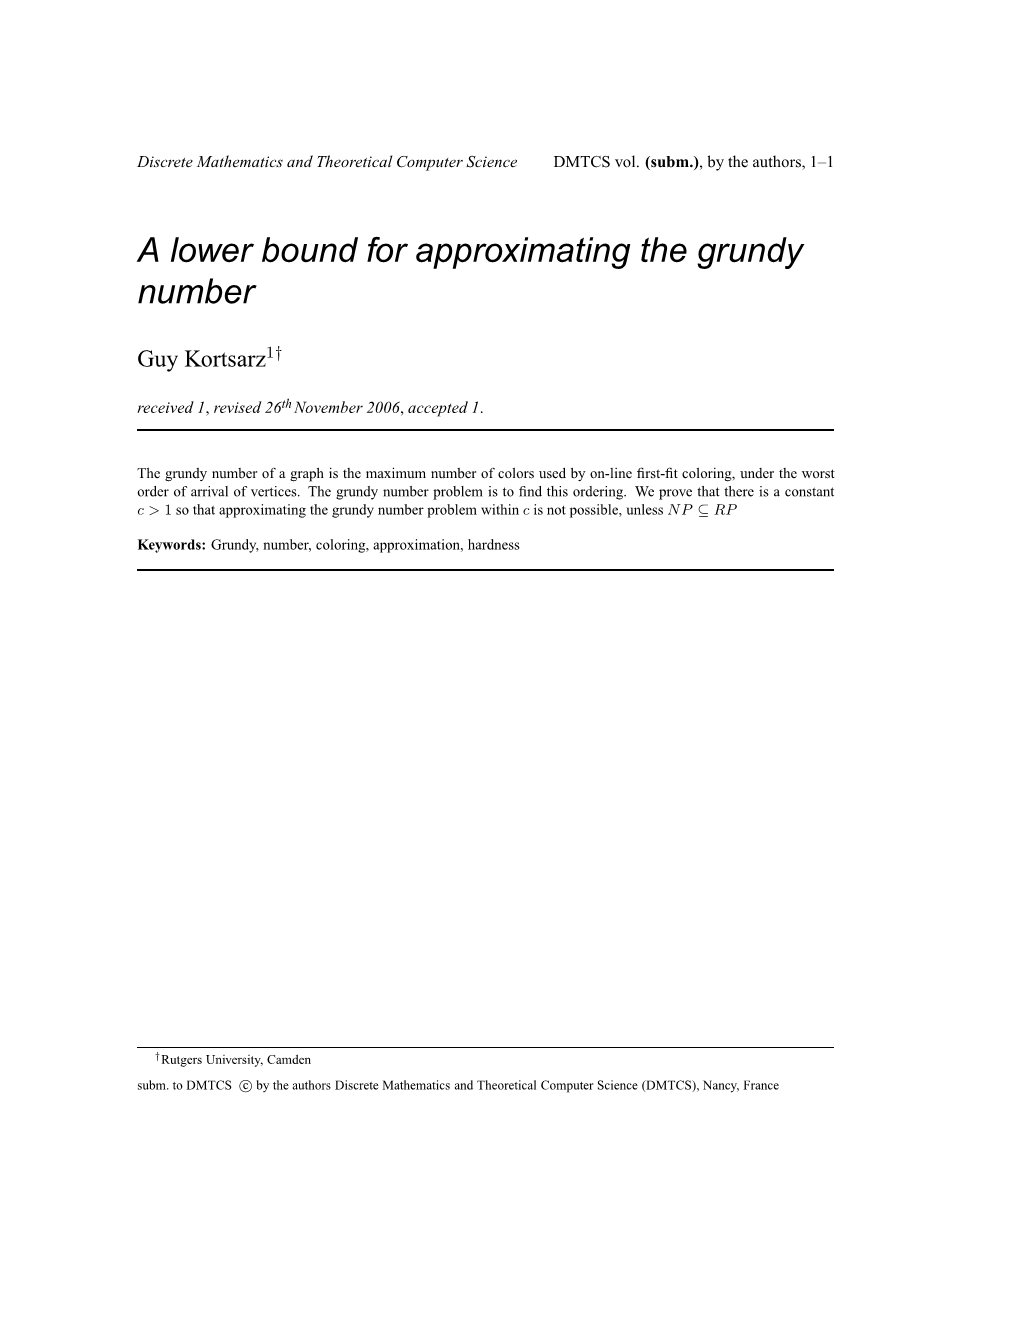 A Lower Bound for Approximating the Grundy Number